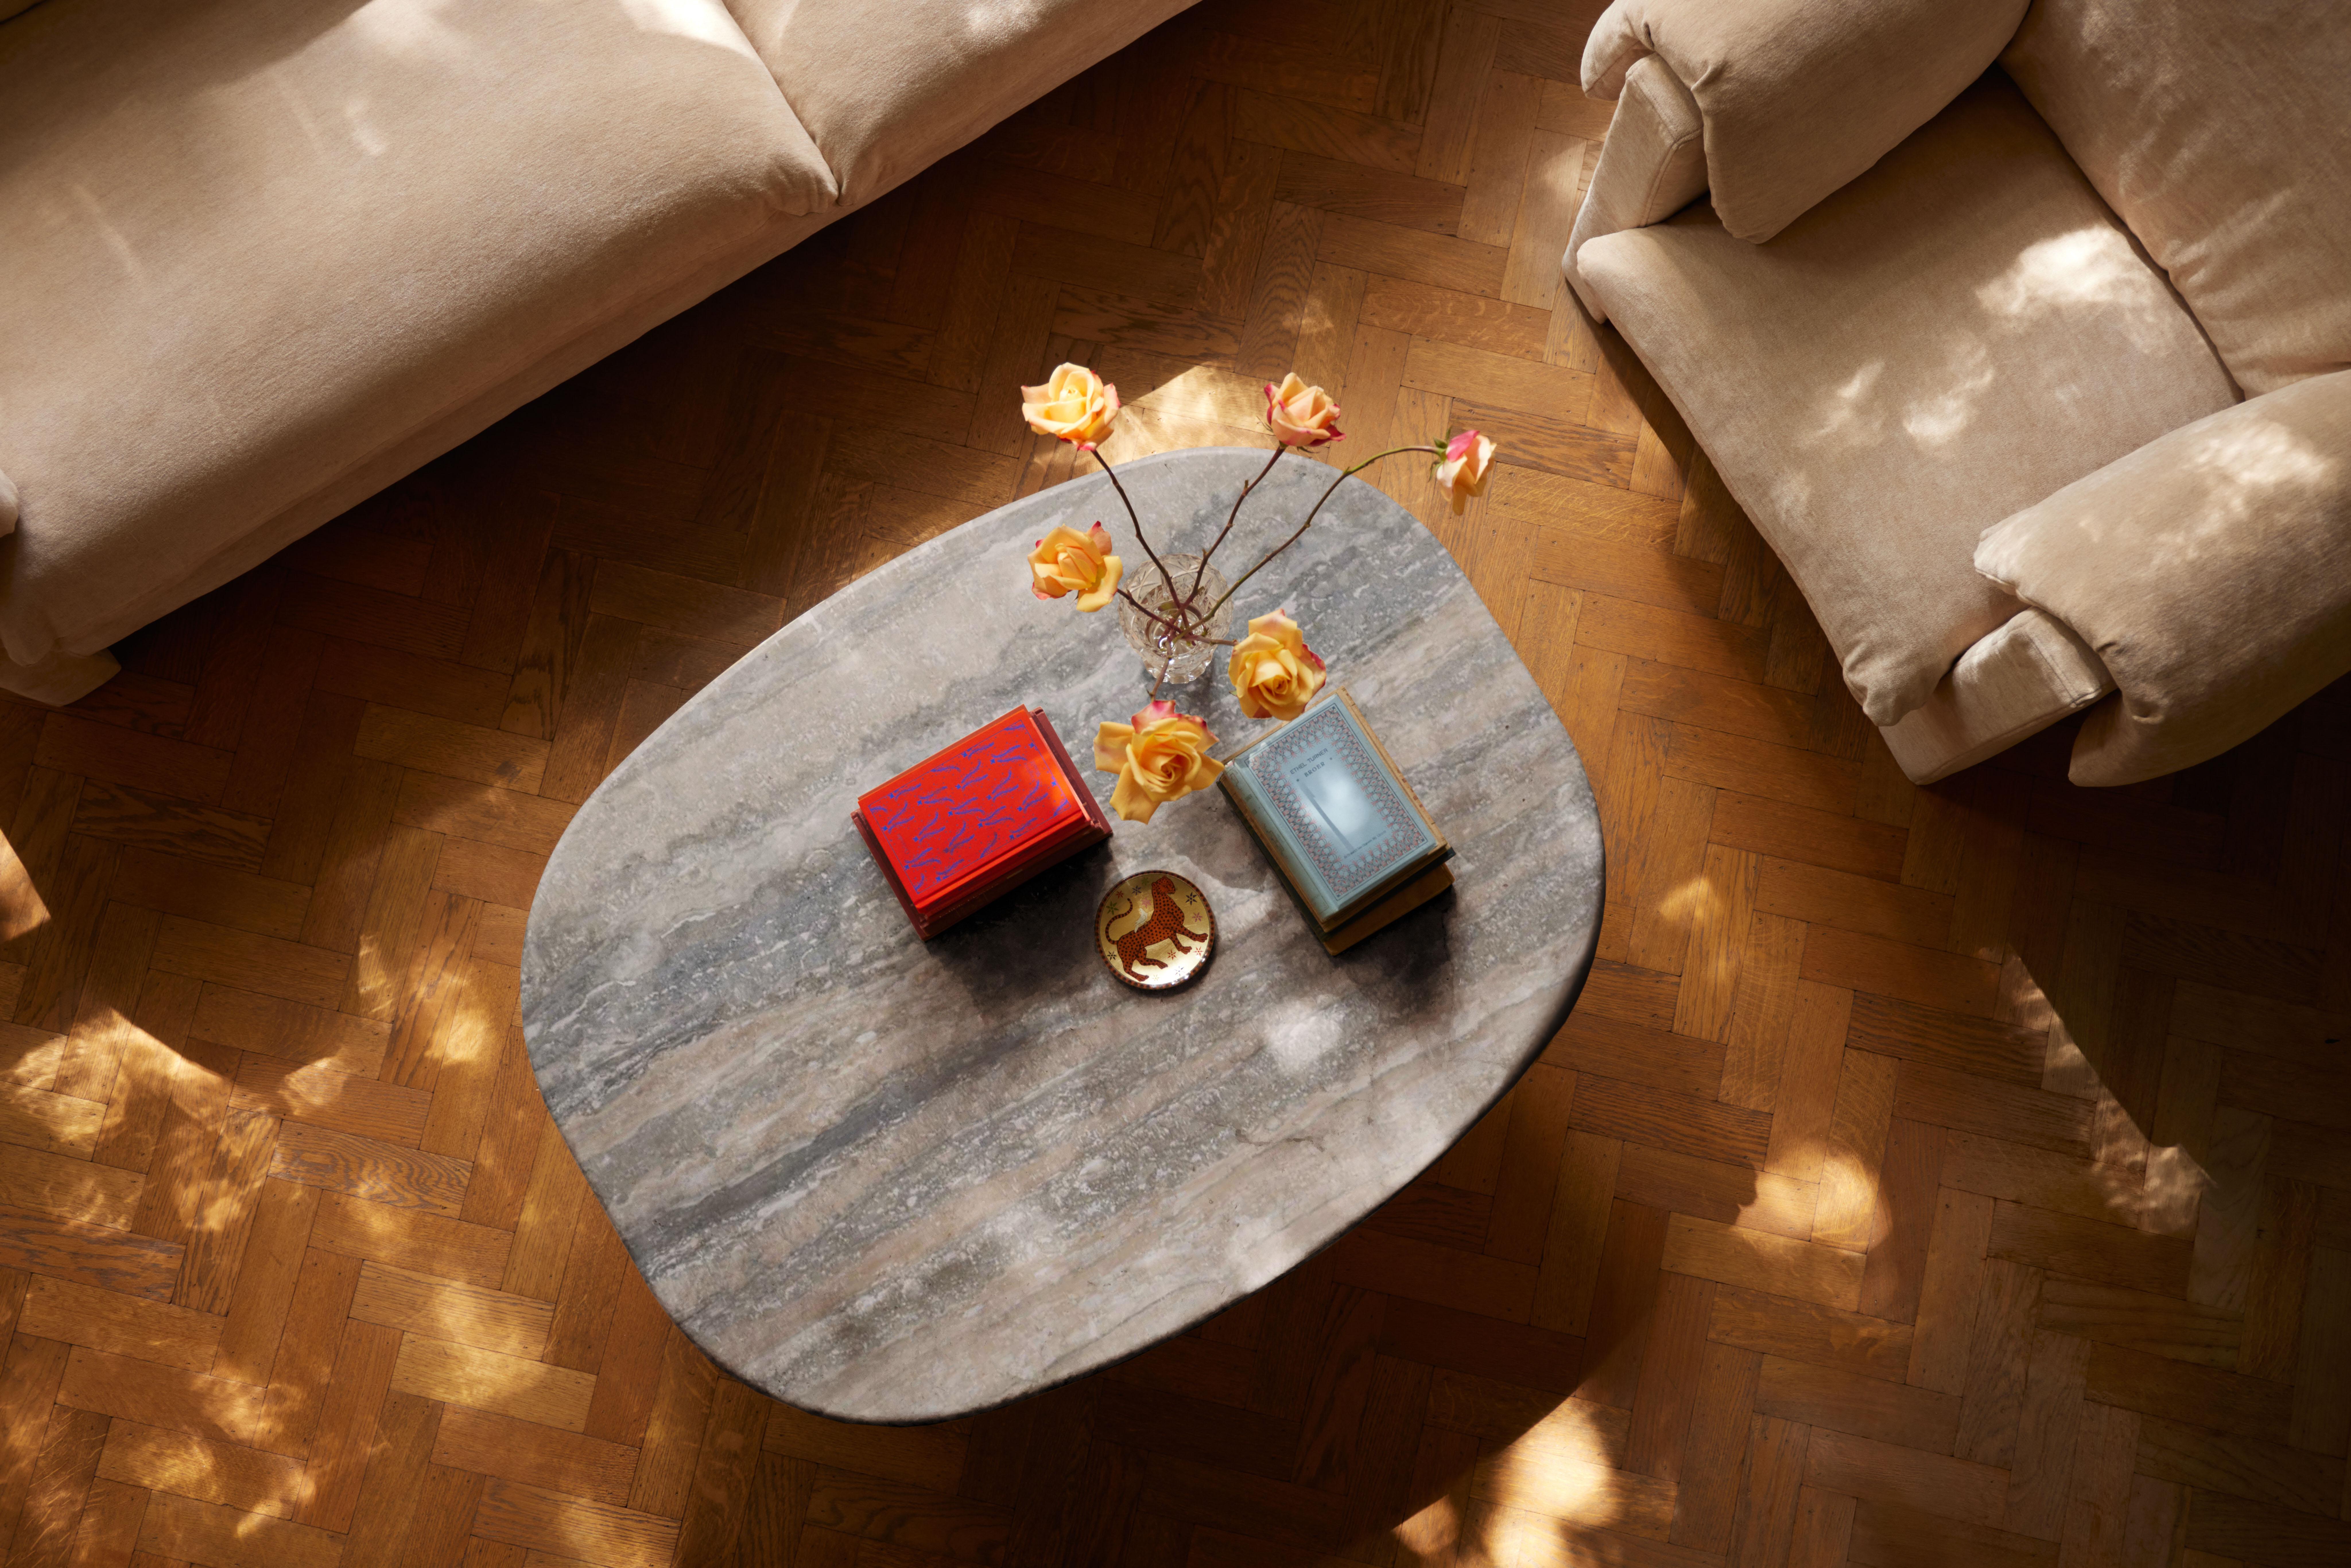 Made in Italy by Master Craftsmen.

We hold the belief that the essence of a place—the inanimate objects and the intricacies of design—can profoundly influence one's experience. With the introduction of the Circa coffee table, our longstanding